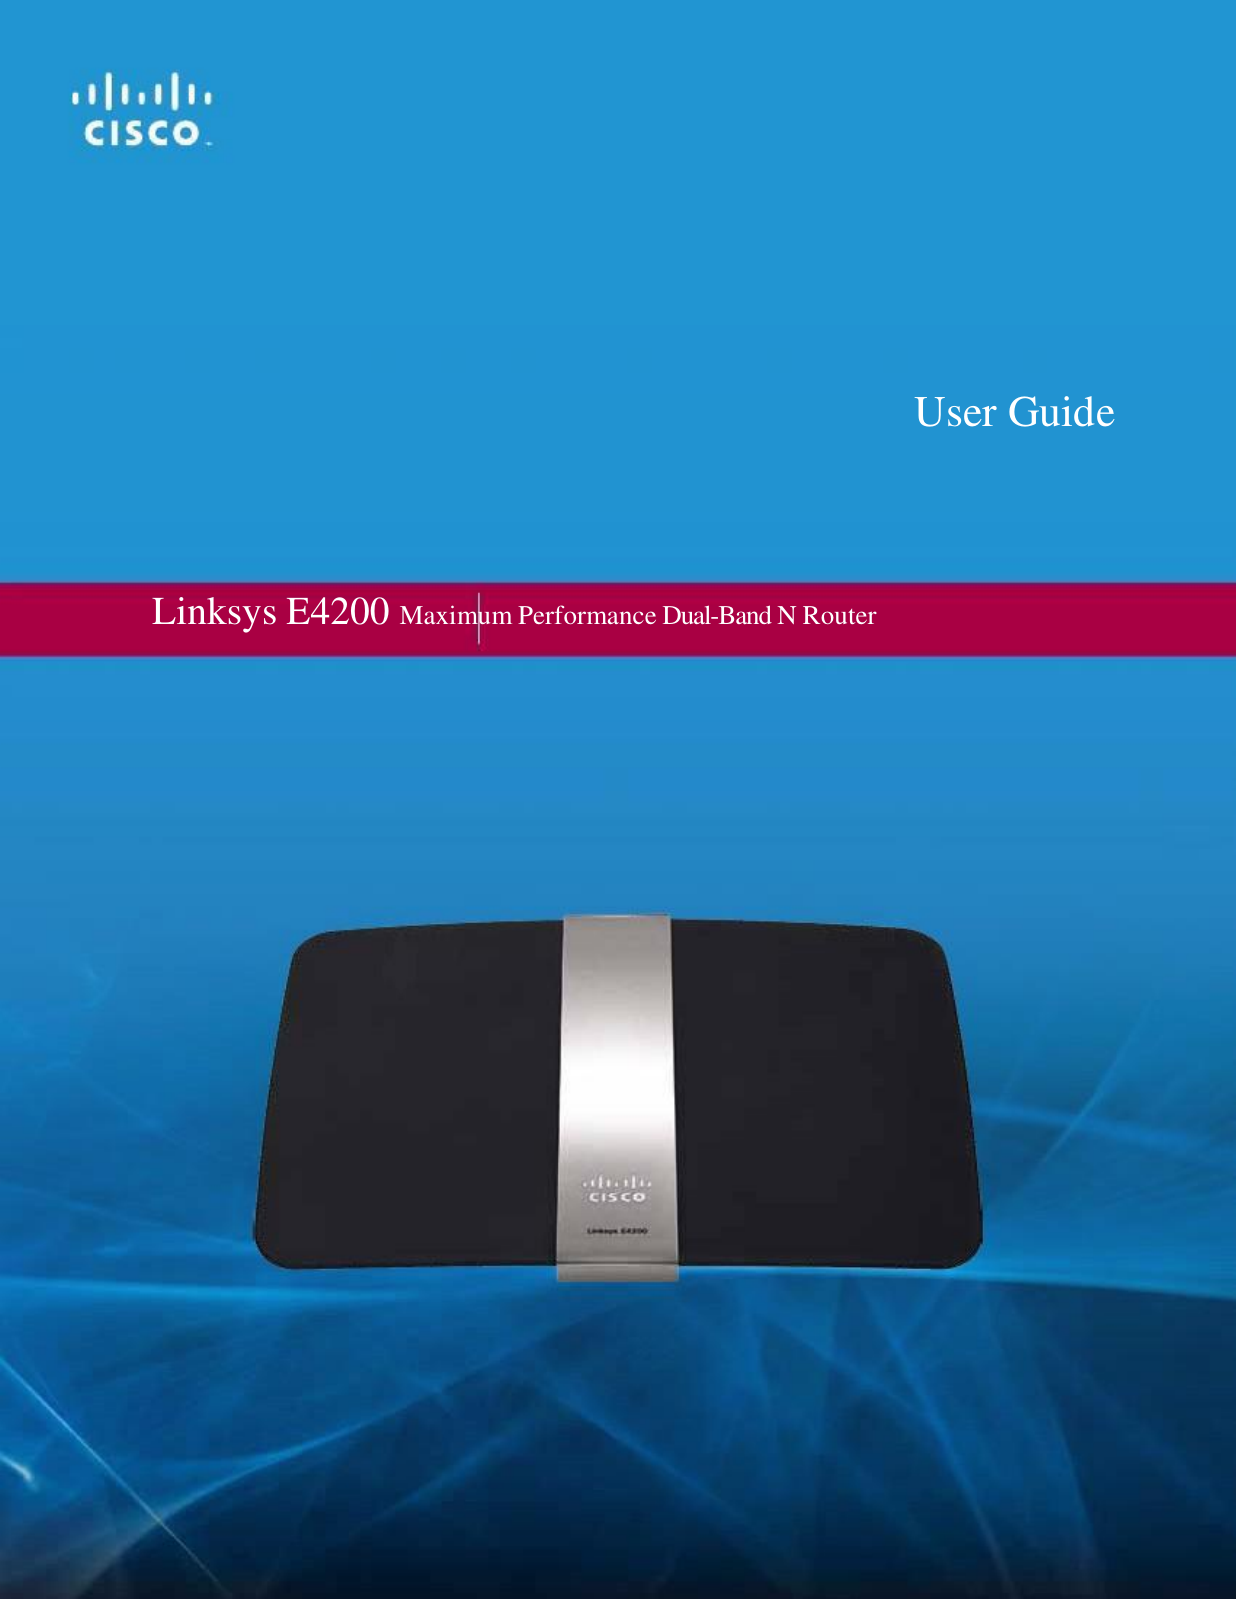               User Guide        Linksys E4200 Maximum Performance Dual-Band N Router 